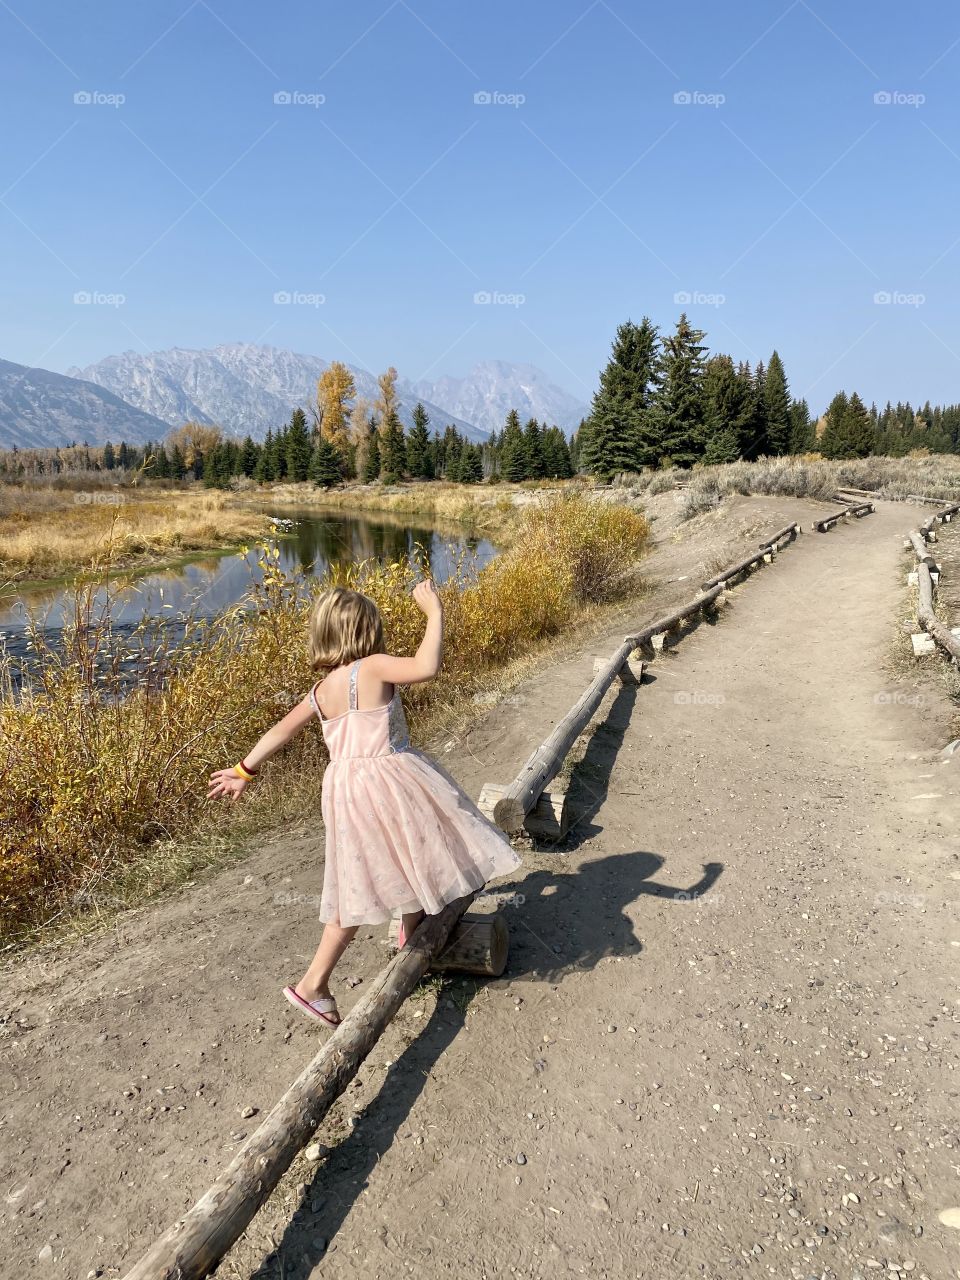 Magical Outdoors! Girl in Pink Exploring the Mountains While Balancing on Logs